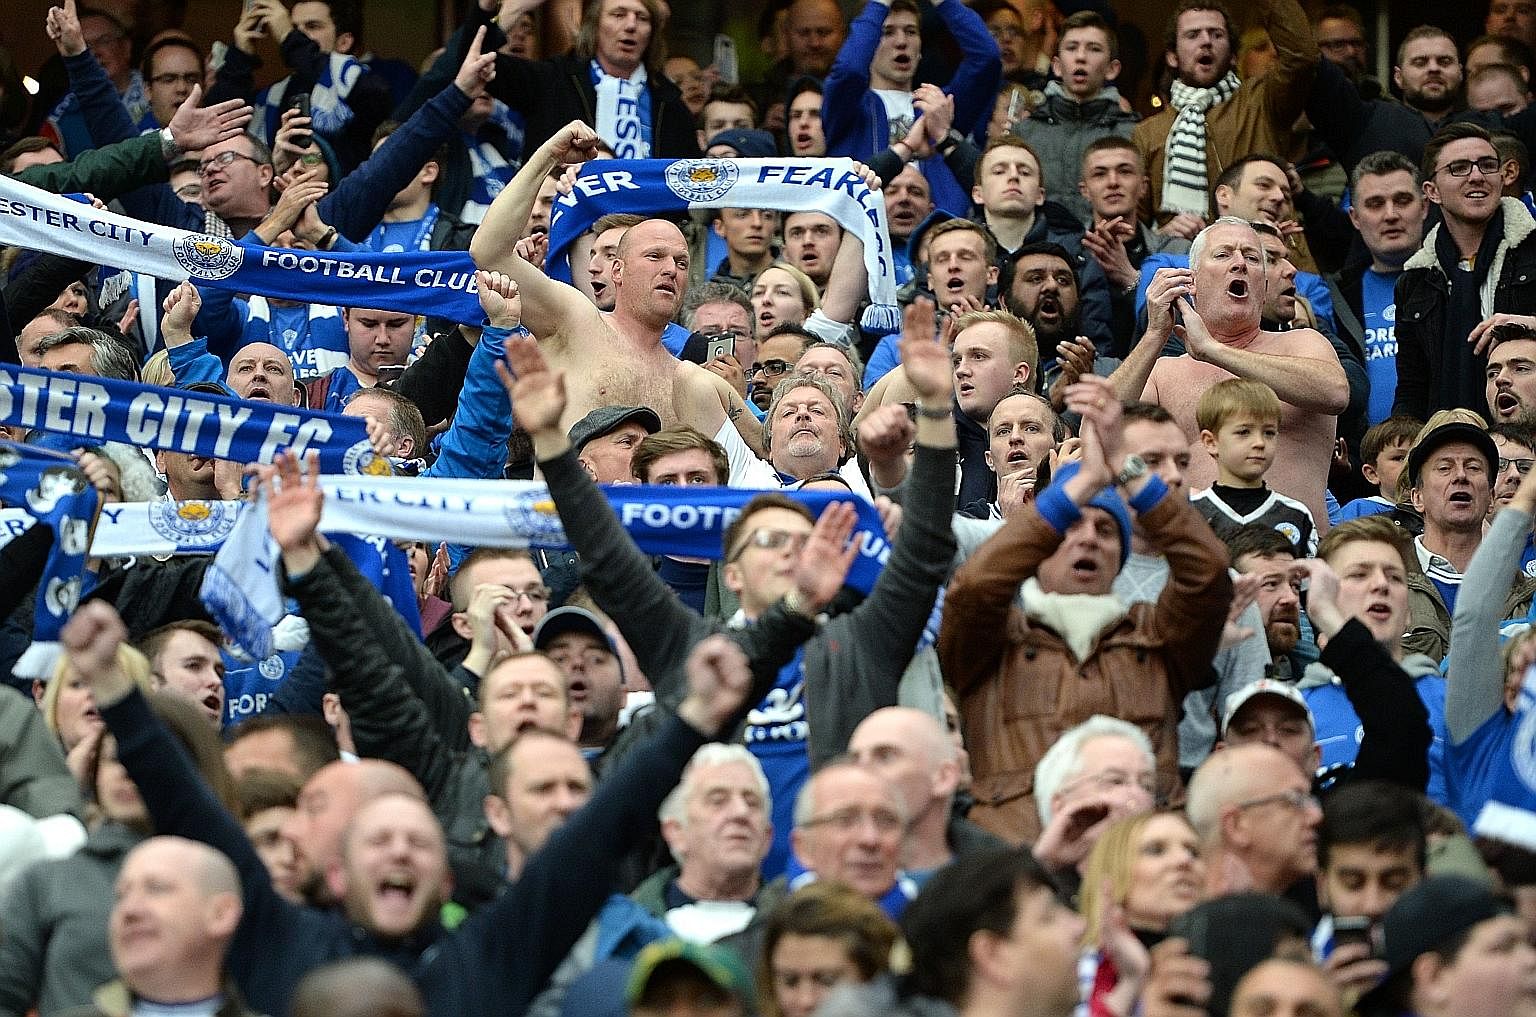 Leicester fans cheering after the English Premier League football match between Leicester City and Manchester United in Manchester on Sunday. The match ended 1-1.